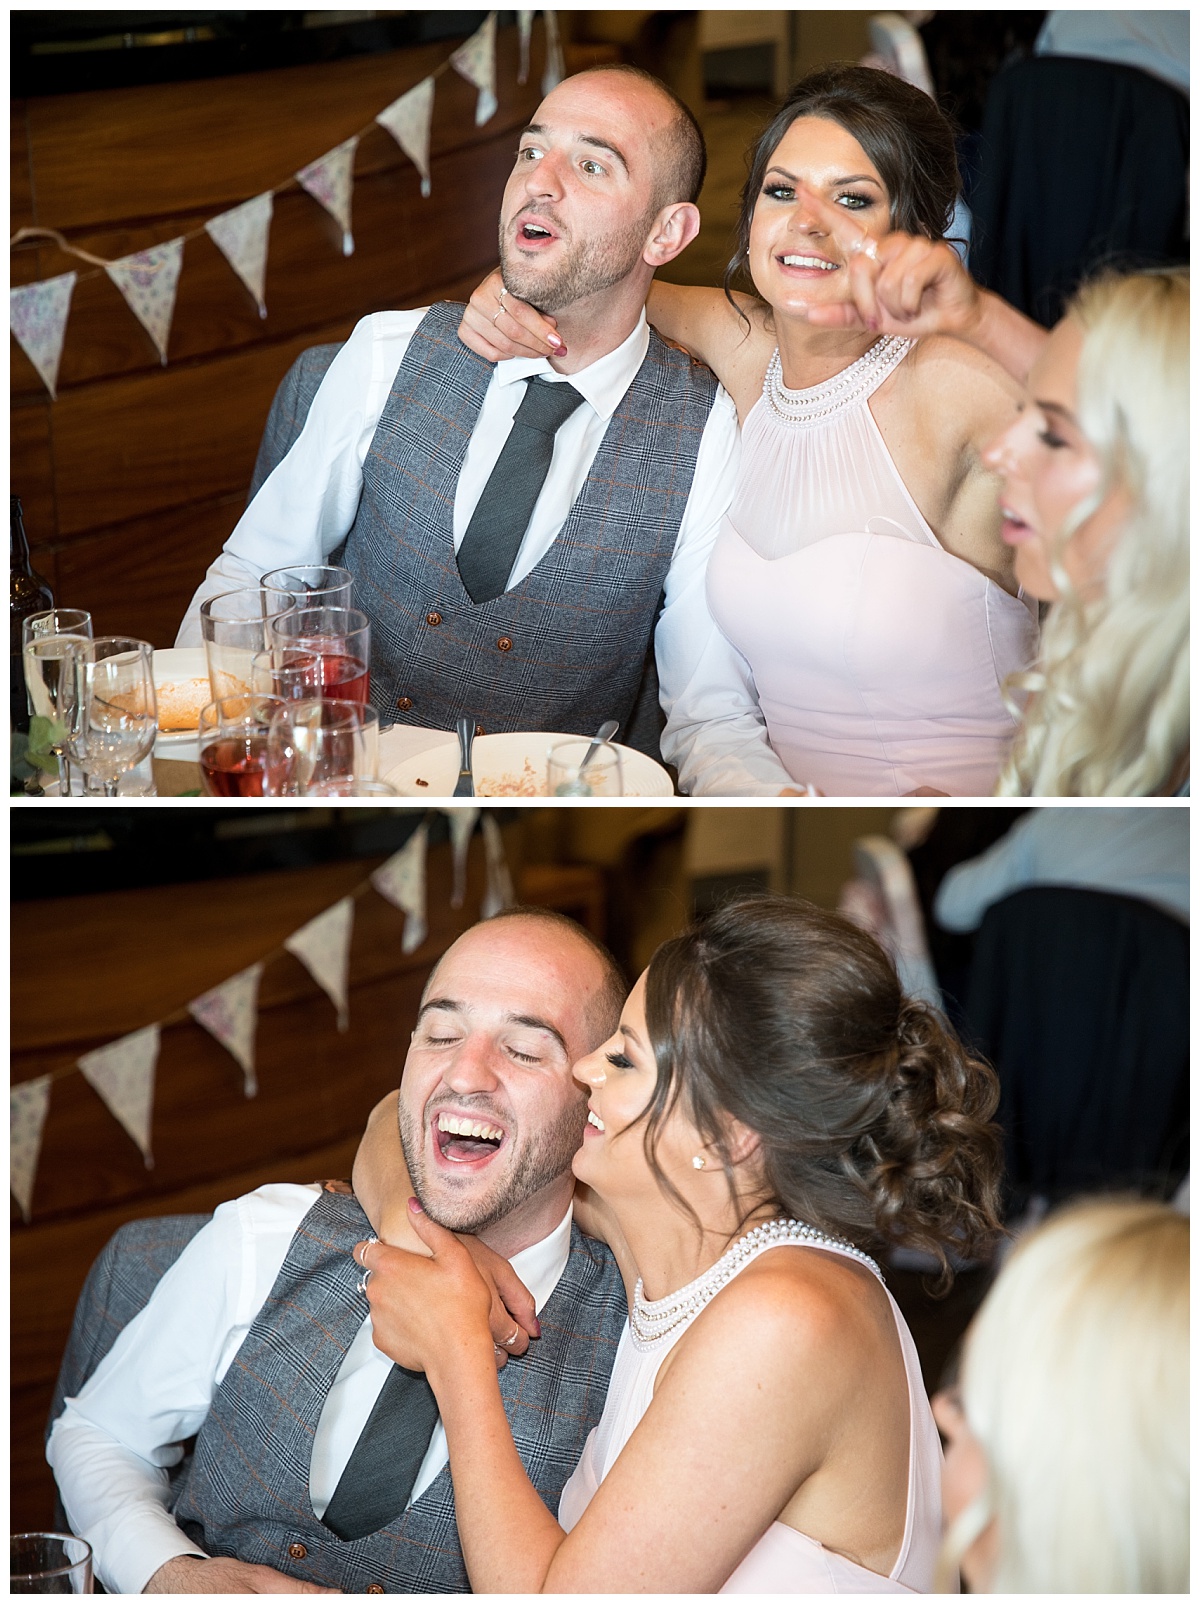 Wedding Photography Manchester - Melissa and Stuarts Mere Golf Resort And Spa Wedding Day 85